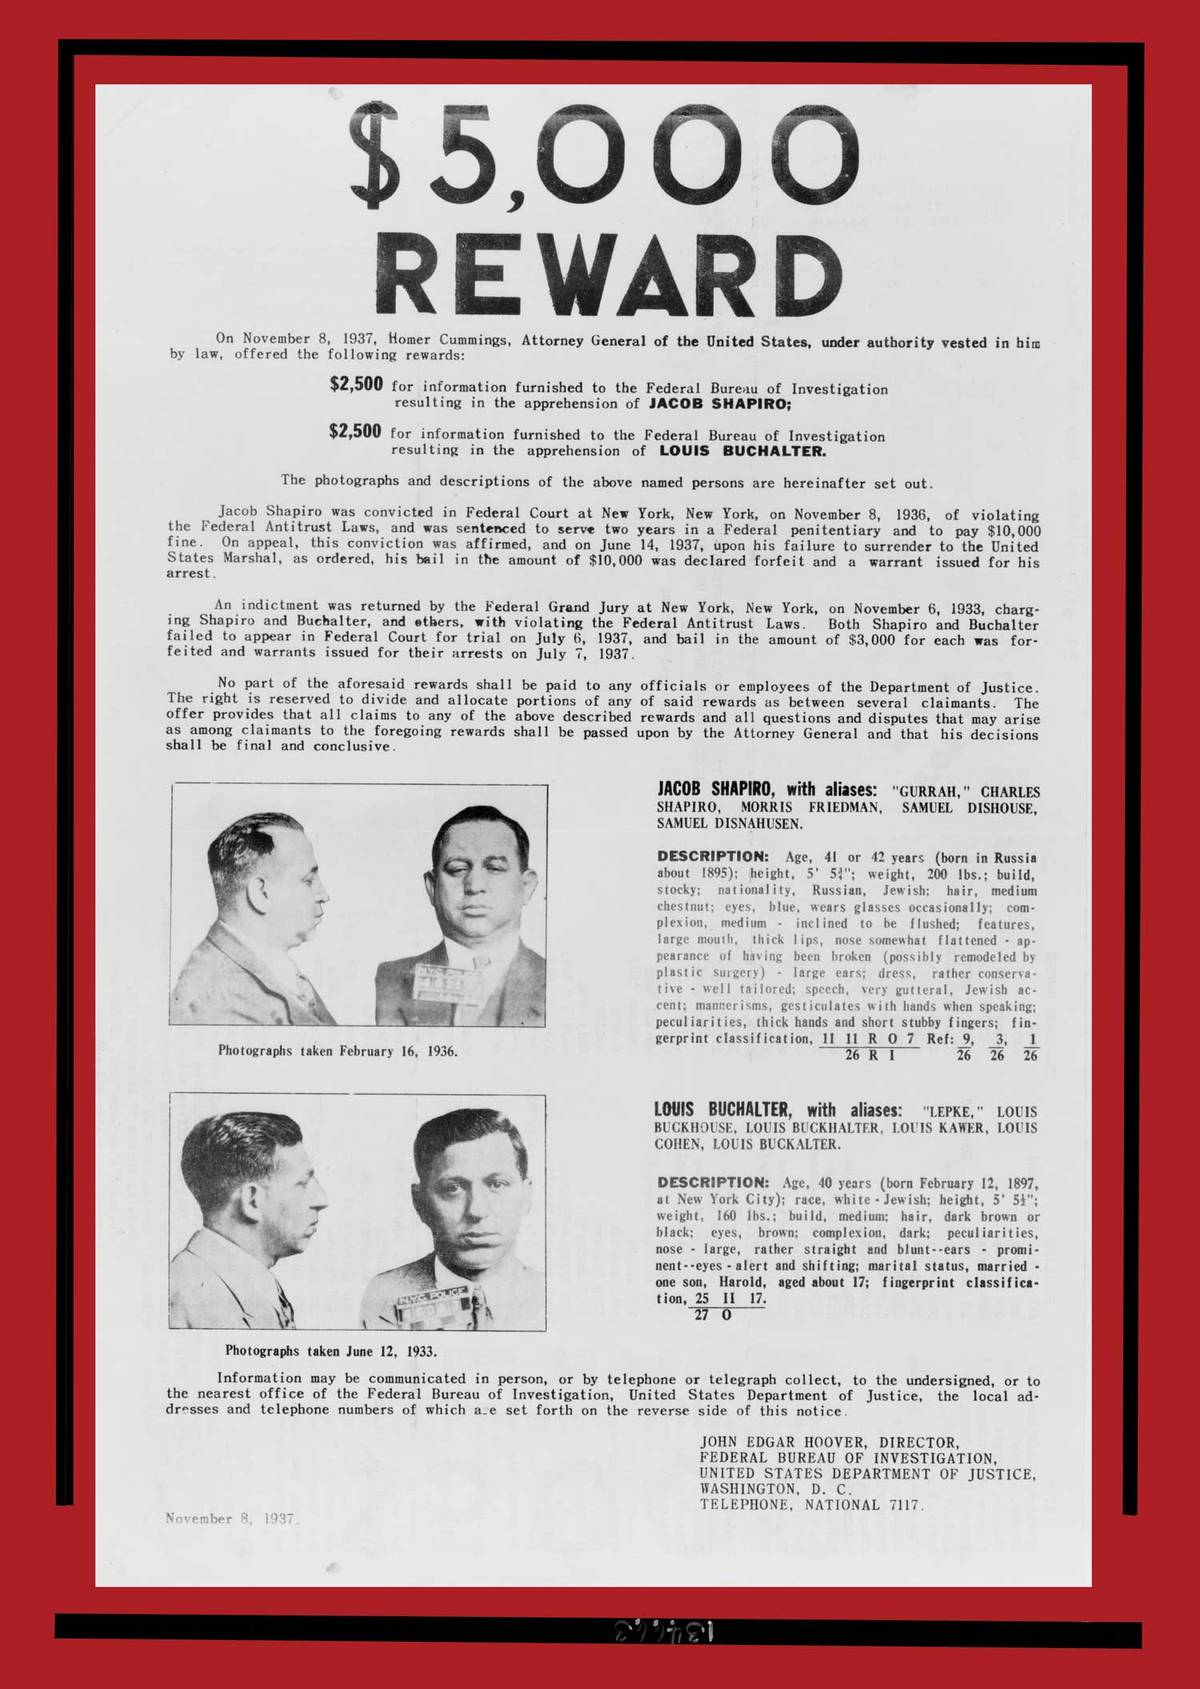  A 1937 wanted poster for Jacob Shapiro and Louis Buchalter